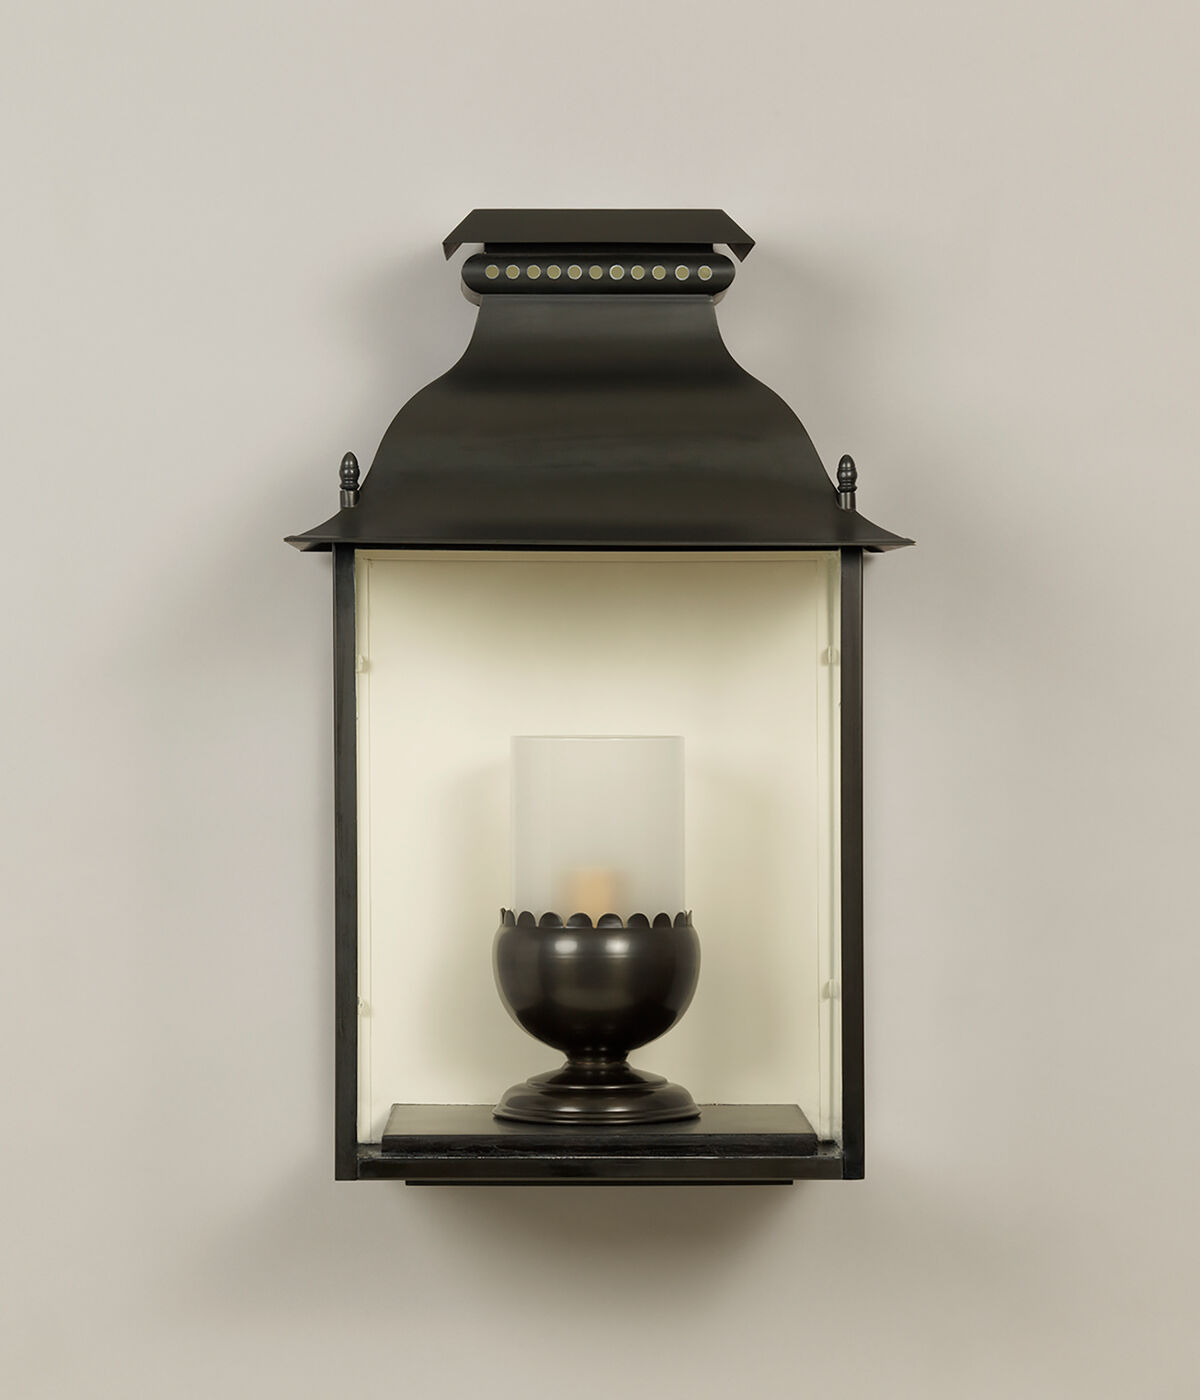 Denmed Lantern by Vaughan